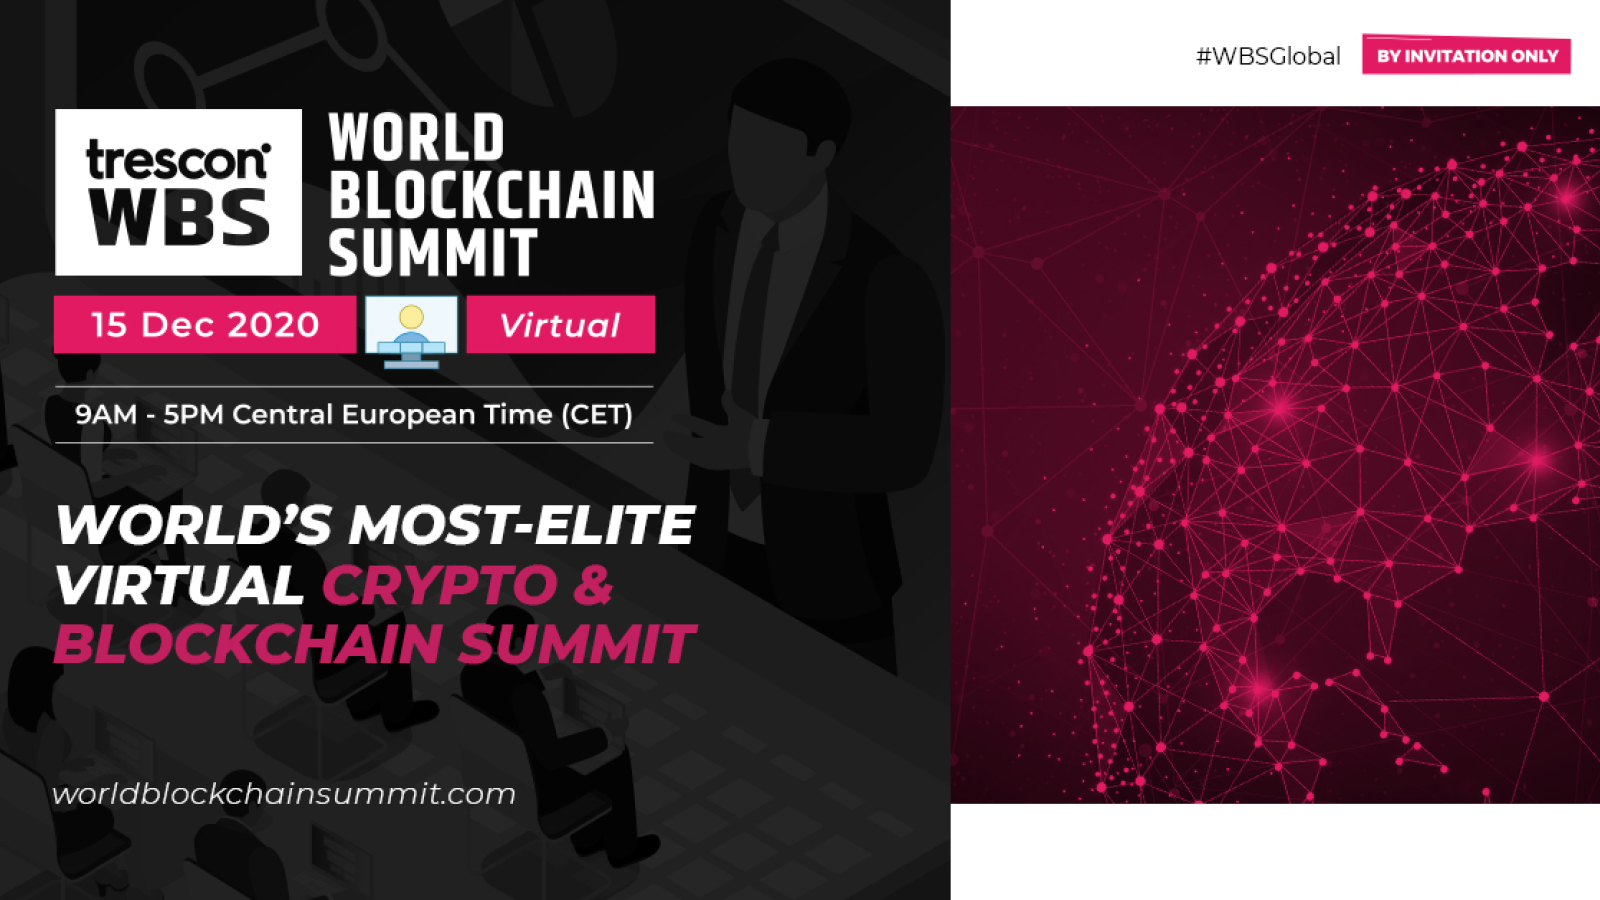 World Blockchain Summit returns virtually, aims to unearth new opportunities as leading voices discuss 2021 Crypto landscape